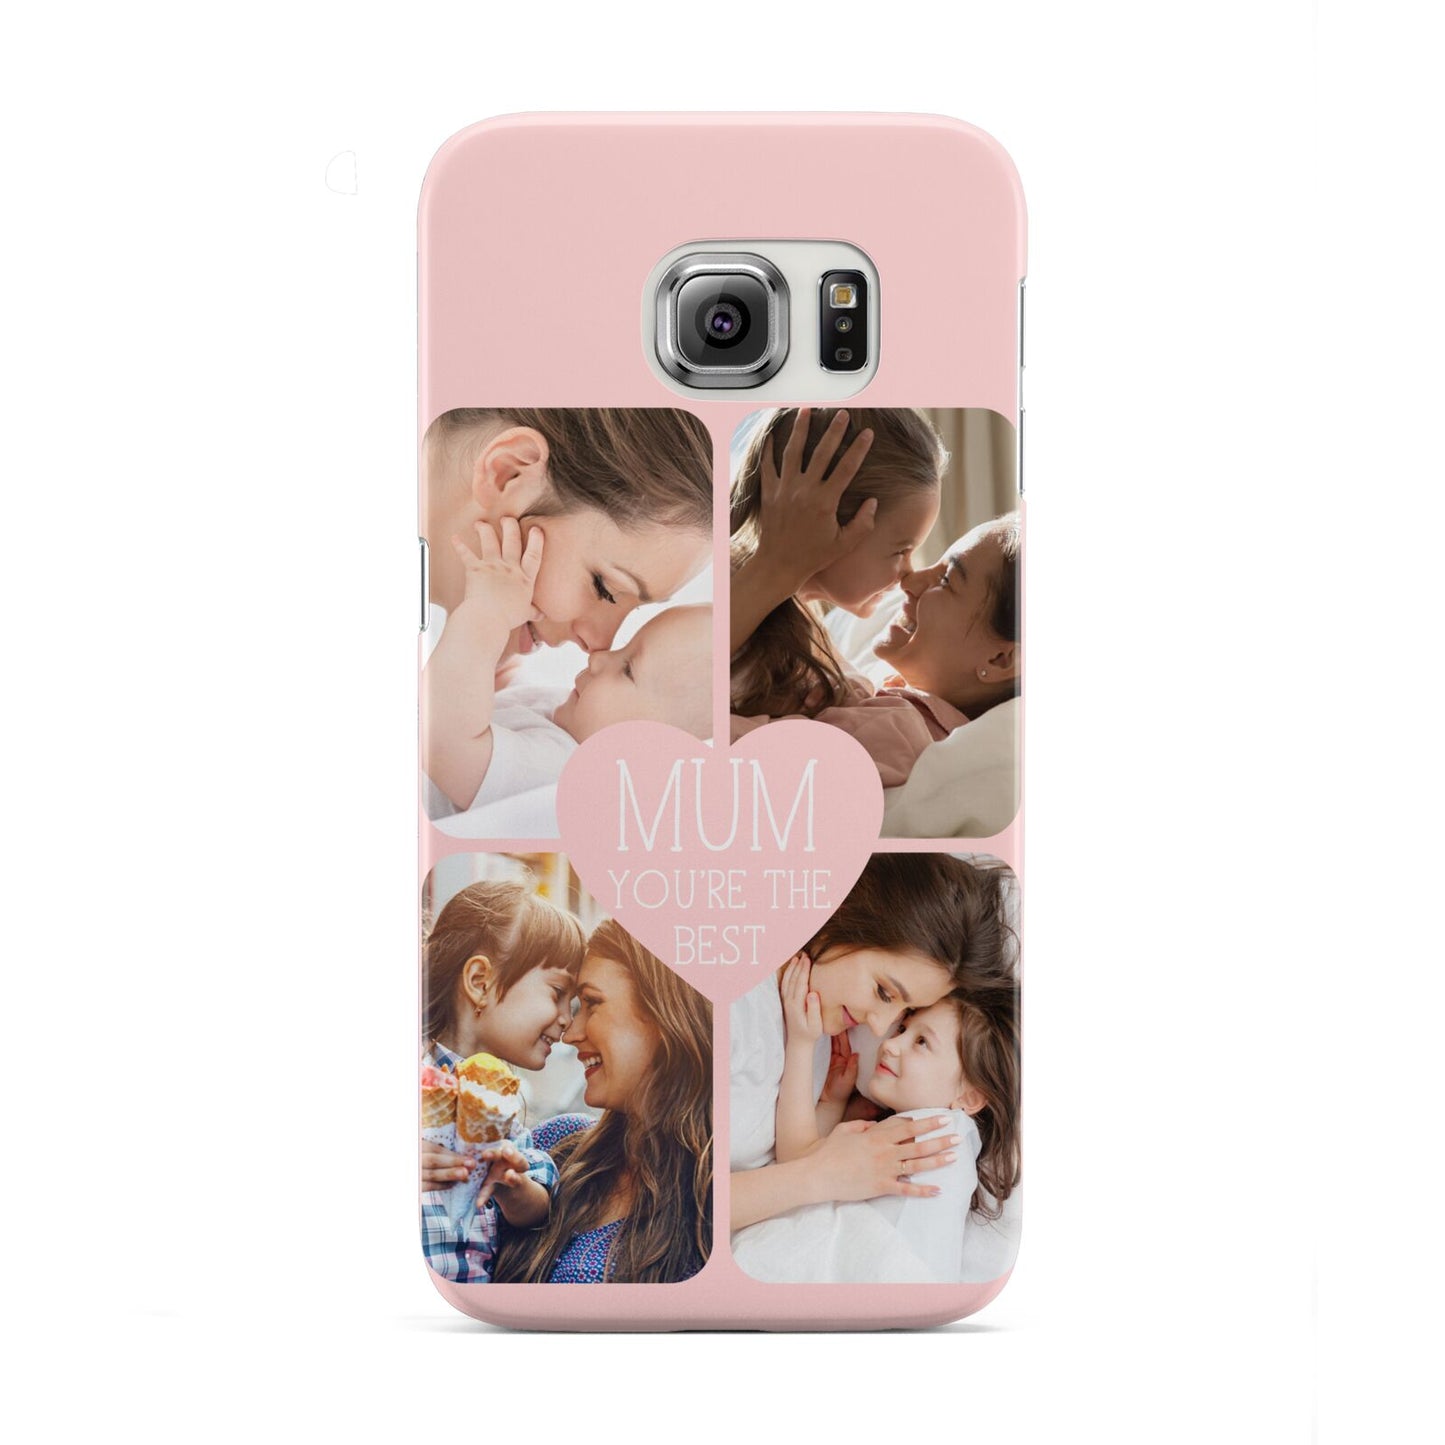 Mothers Day Four Photo Upload Samsung Galaxy S6 Edge Case